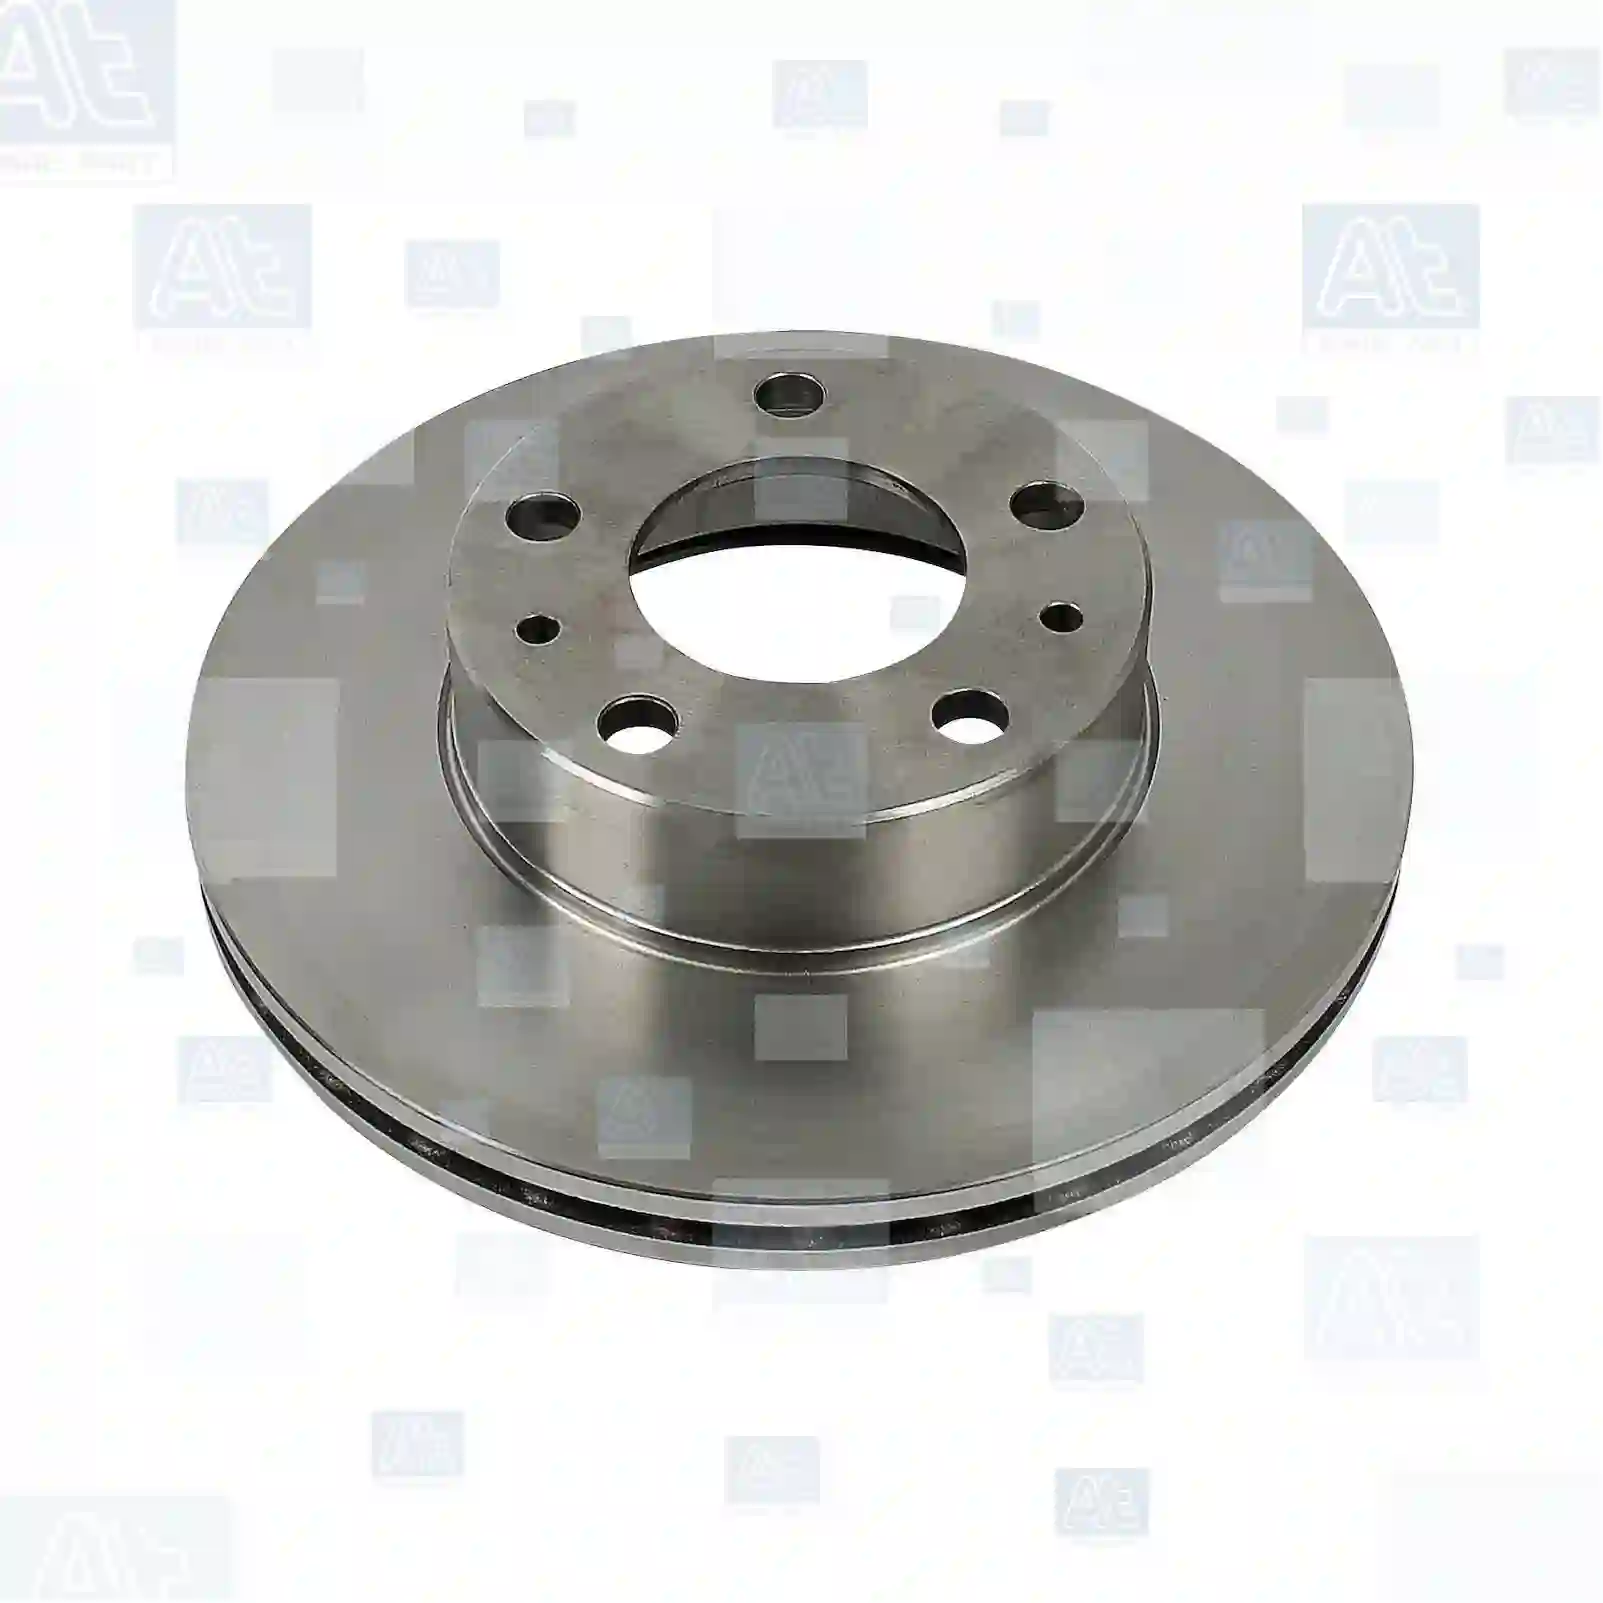 Brake disc, at no 77714734, oem no: 00004246Y1, 1606400980, 1607872080, 4246L2, 4246L3, 4246L4, 4246V4, 4246X9, 4246Y1, 424926, 424927, 424999, 4249E2, 4249G3, 4249H8, 4249K3, 1300501080, 46806233, 51728377, 51740244, 51848618, 51848619, 71738905, 71772595S, 00004246Y1, 1606400980, 1607872080, 4246L2, 4246L3, 4246L4, 4246V4, 4246X9, 4246Y1, 424926, 424927, 424999, 4249E2, 4249G3, 4249H8, 4249K3 At Spare Part | Engine, Accelerator Pedal, Camshaft, Connecting Rod, Crankcase, Crankshaft, Cylinder Head, Engine Suspension Mountings, Exhaust Manifold, Exhaust Gas Recirculation, Filter Kits, Flywheel Housing, General Overhaul Kits, Engine, Intake Manifold, Oil Cleaner, Oil Cooler, Oil Filter, Oil Pump, Oil Sump, Piston & Liner, Sensor & Switch, Timing Case, Turbocharger, Cooling System, Belt Tensioner, Coolant Filter, Coolant Pipe, Corrosion Prevention Agent, Drive, Expansion Tank, Fan, Intercooler, Monitors & Gauges, Radiator, Thermostat, V-Belt / Timing belt, Water Pump, Fuel System, Electronical Injector Unit, Feed Pump, Fuel Filter, cpl., Fuel Gauge Sender,  Fuel Line, Fuel Pump, Fuel Tank, Injection Line Kit, Injection Pump, Exhaust System, Clutch & Pedal, Gearbox, Propeller Shaft, Axles, Brake System, Hubs & Wheels, Suspension, Leaf Spring, Universal Parts / Accessories, Steering, Electrical System, Cabin Brake disc, at no 77714734, oem no: 00004246Y1, 1606400980, 1607872080, 4246L2, 4246L3, 4246L4, 4246V4, 4246X9, 4246Y1, 424926, 424927, 424999, 4249E2, 4249G3, 4249H8, 4249K3, 1300501080, 46806233, 51728377, 51740244, 51848618, 51848619, 71738905, 71772595S, 00004246Y1, 1606400980, 1607872080, 4246L2, 4246L3, 4246L4, 4246V4, 4246X9, 4246Y1, 424926, 424927, 424999, 4249E2, 4249G3, 4249H8, 4249K3 At Spare Part | Engine, Accelerator Pedal, Camshaft, Connecting Rod, Crankcase, Crankshaft, Cylinder Head, Engine Suspension Mountings, Exhaust Manifold, Exhaust Gas Recirculation, Filter Kits, Flywheel Housing, General Overhaul Kits, Engine, Intake Manifold, Oil Cleaner, Oil Cooler, Oil Filter, Oil Pump, Oil Sump, Piston & Liner, Sensor & Switch, Timing Case, Turbocharger, Cooling System, Belt Tensioner, Coolant Filter, Coolant Pipe, Corrosion Prevention Agent, Drive, Expansion Tank, Fan, Intercooler, Monitors & Gauges, Radiator, Thermostat, V-Belt / Timing belt, Water Pump, Fuel System, Electronical Injector Unit, Feed Pump, Fuel Filter, cpl., Fuel Gauge Sender,  Fuel Line, Fuel Pump, Fuel Tank, Injection Line Kit, Injection Pump, Exhaust System, Clutch & Pedal, Gearbox, Propeller Shaft, Axles, Brake System, Hubs & Wheels, Suspension, Leaf Spring, Universal Parts / Accessories, Steering, Electrical System, Cabin